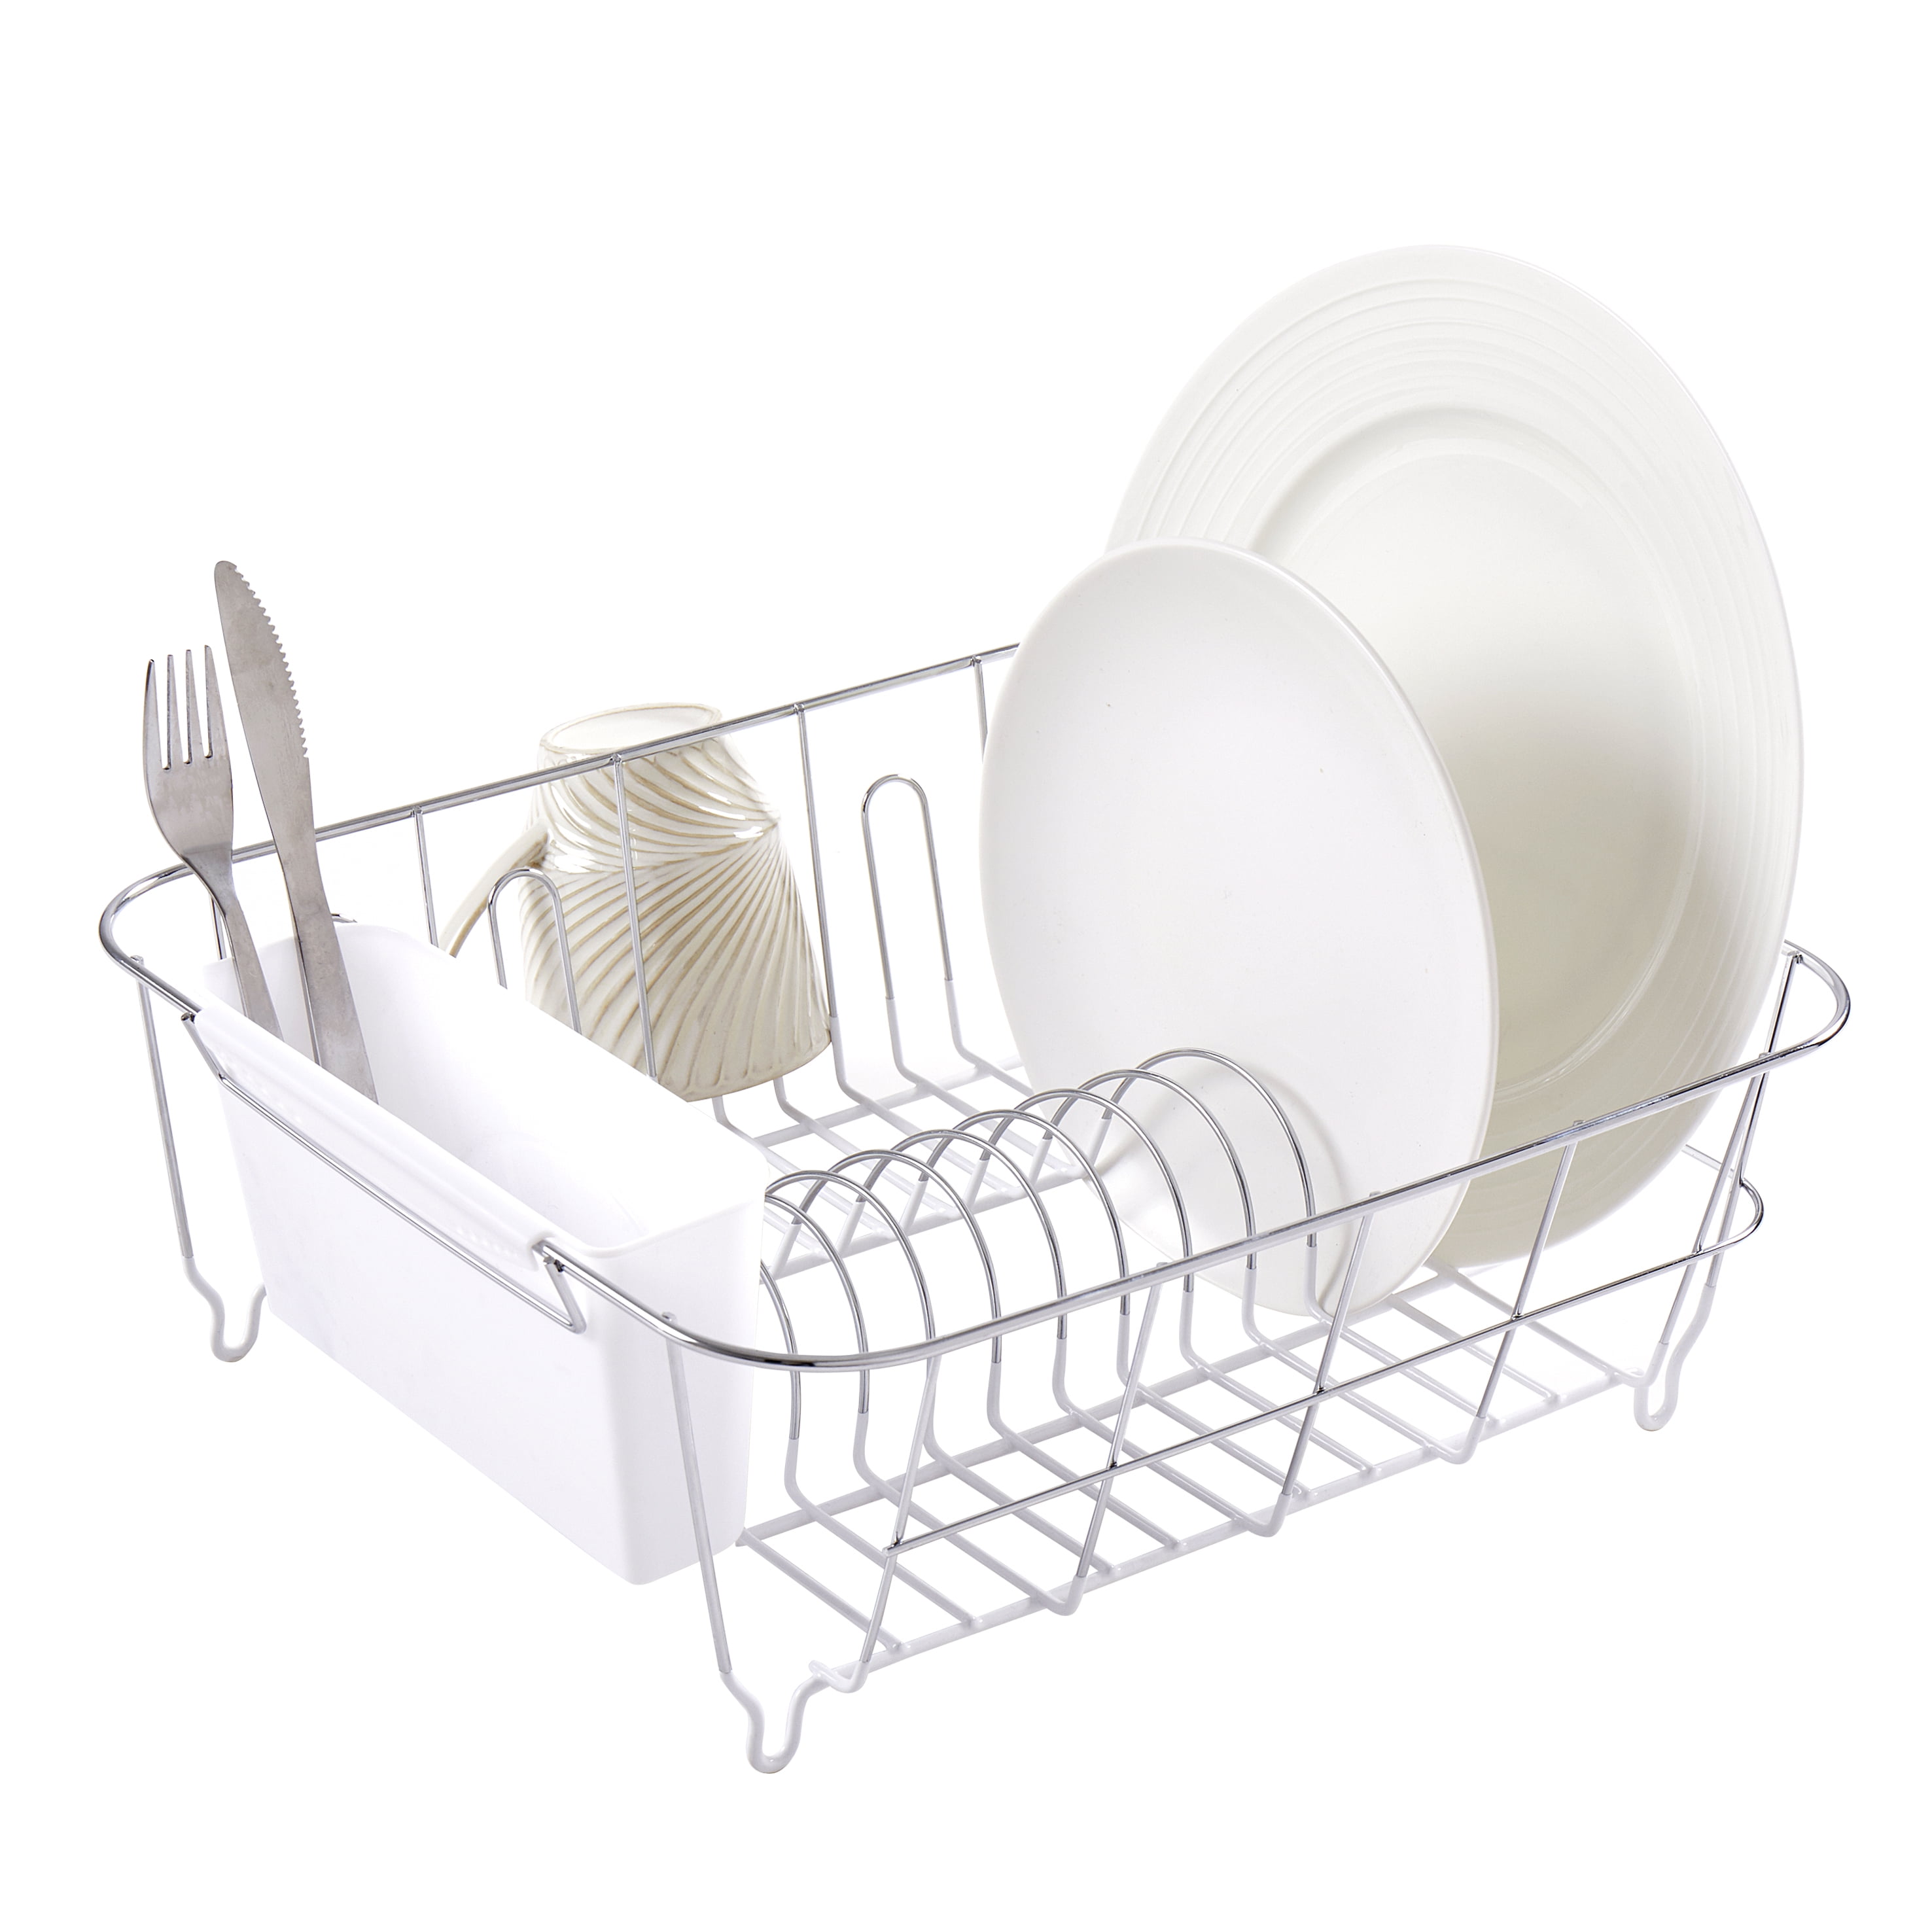 Rugs 2 Tier Stainless Steel Extra Large Dish Drainer with Drip  Tray,62x36x42.5cm / 24x14x16.7in,White Dish Drainer for Kitchen Countertop  Home Table